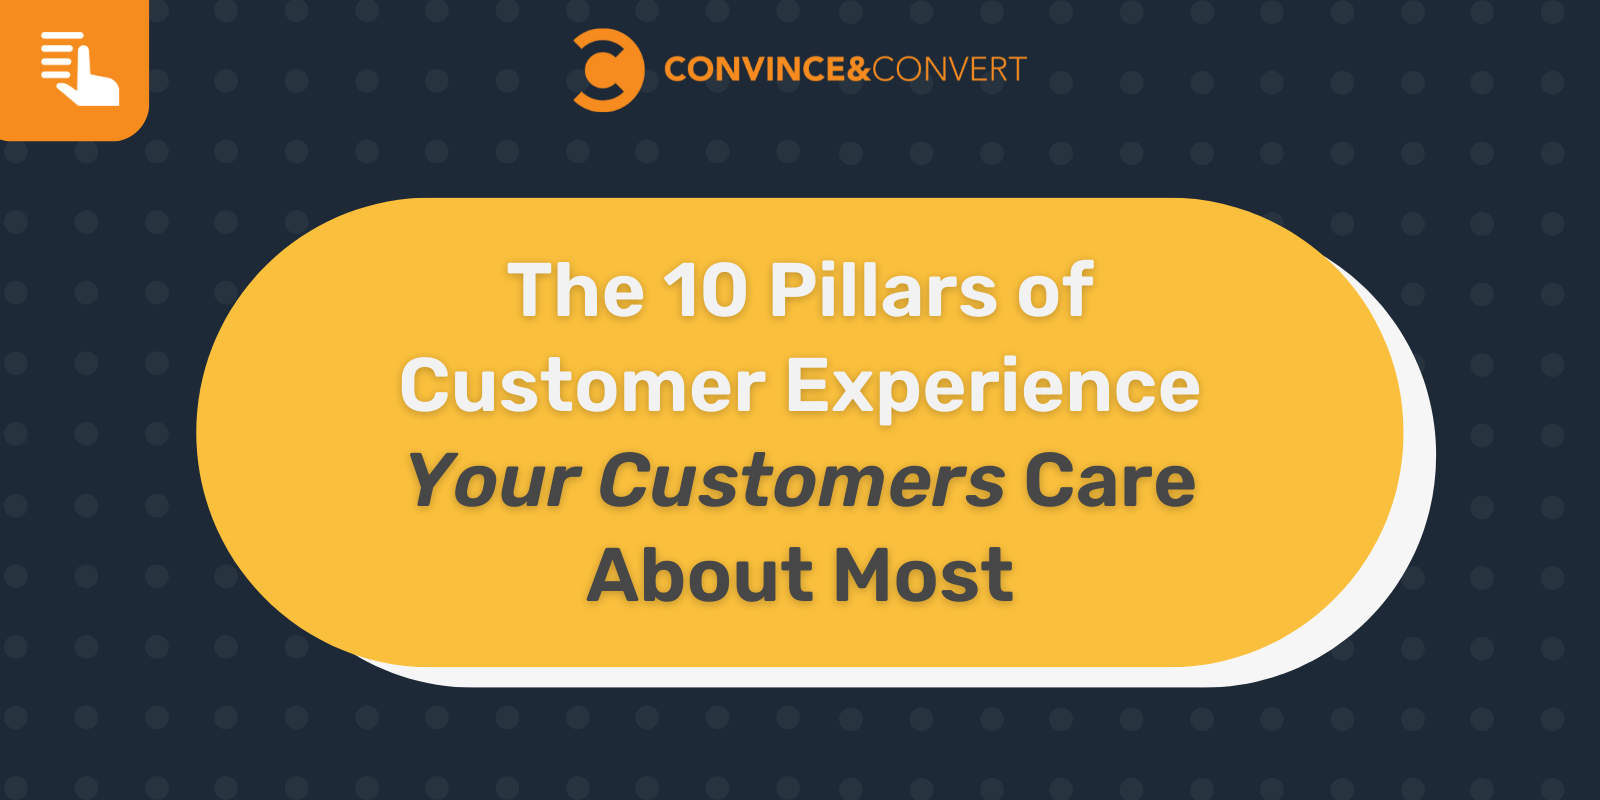 You are currently viewing The 10 Pillars of Customer Experience Your Customers Care About Most